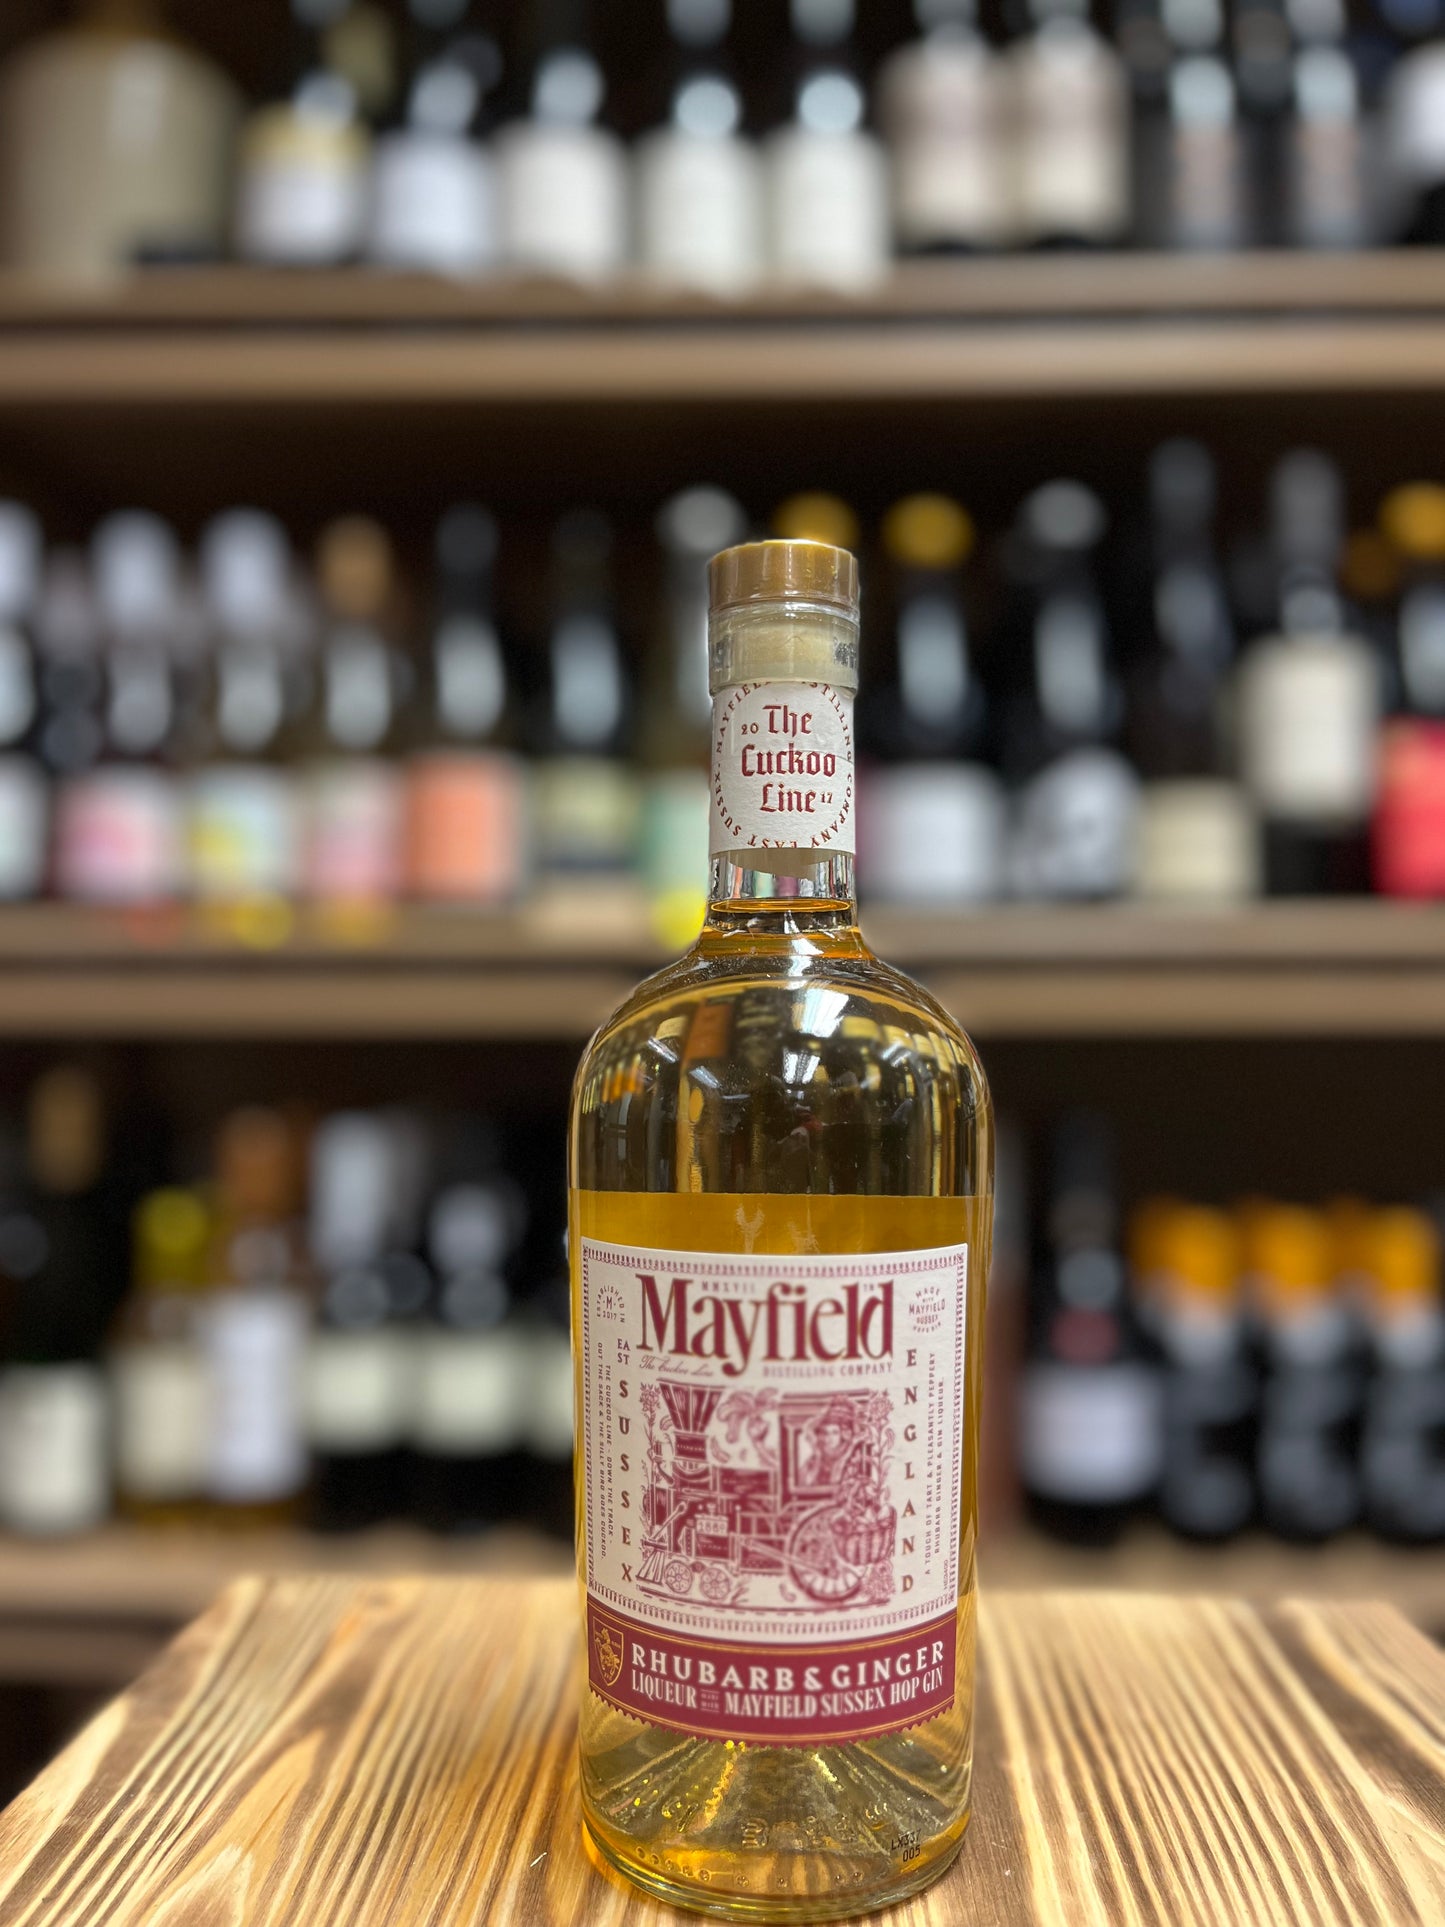 Mayfield Sussex Hop Gin - Rhubarb and Ginger Liqueur